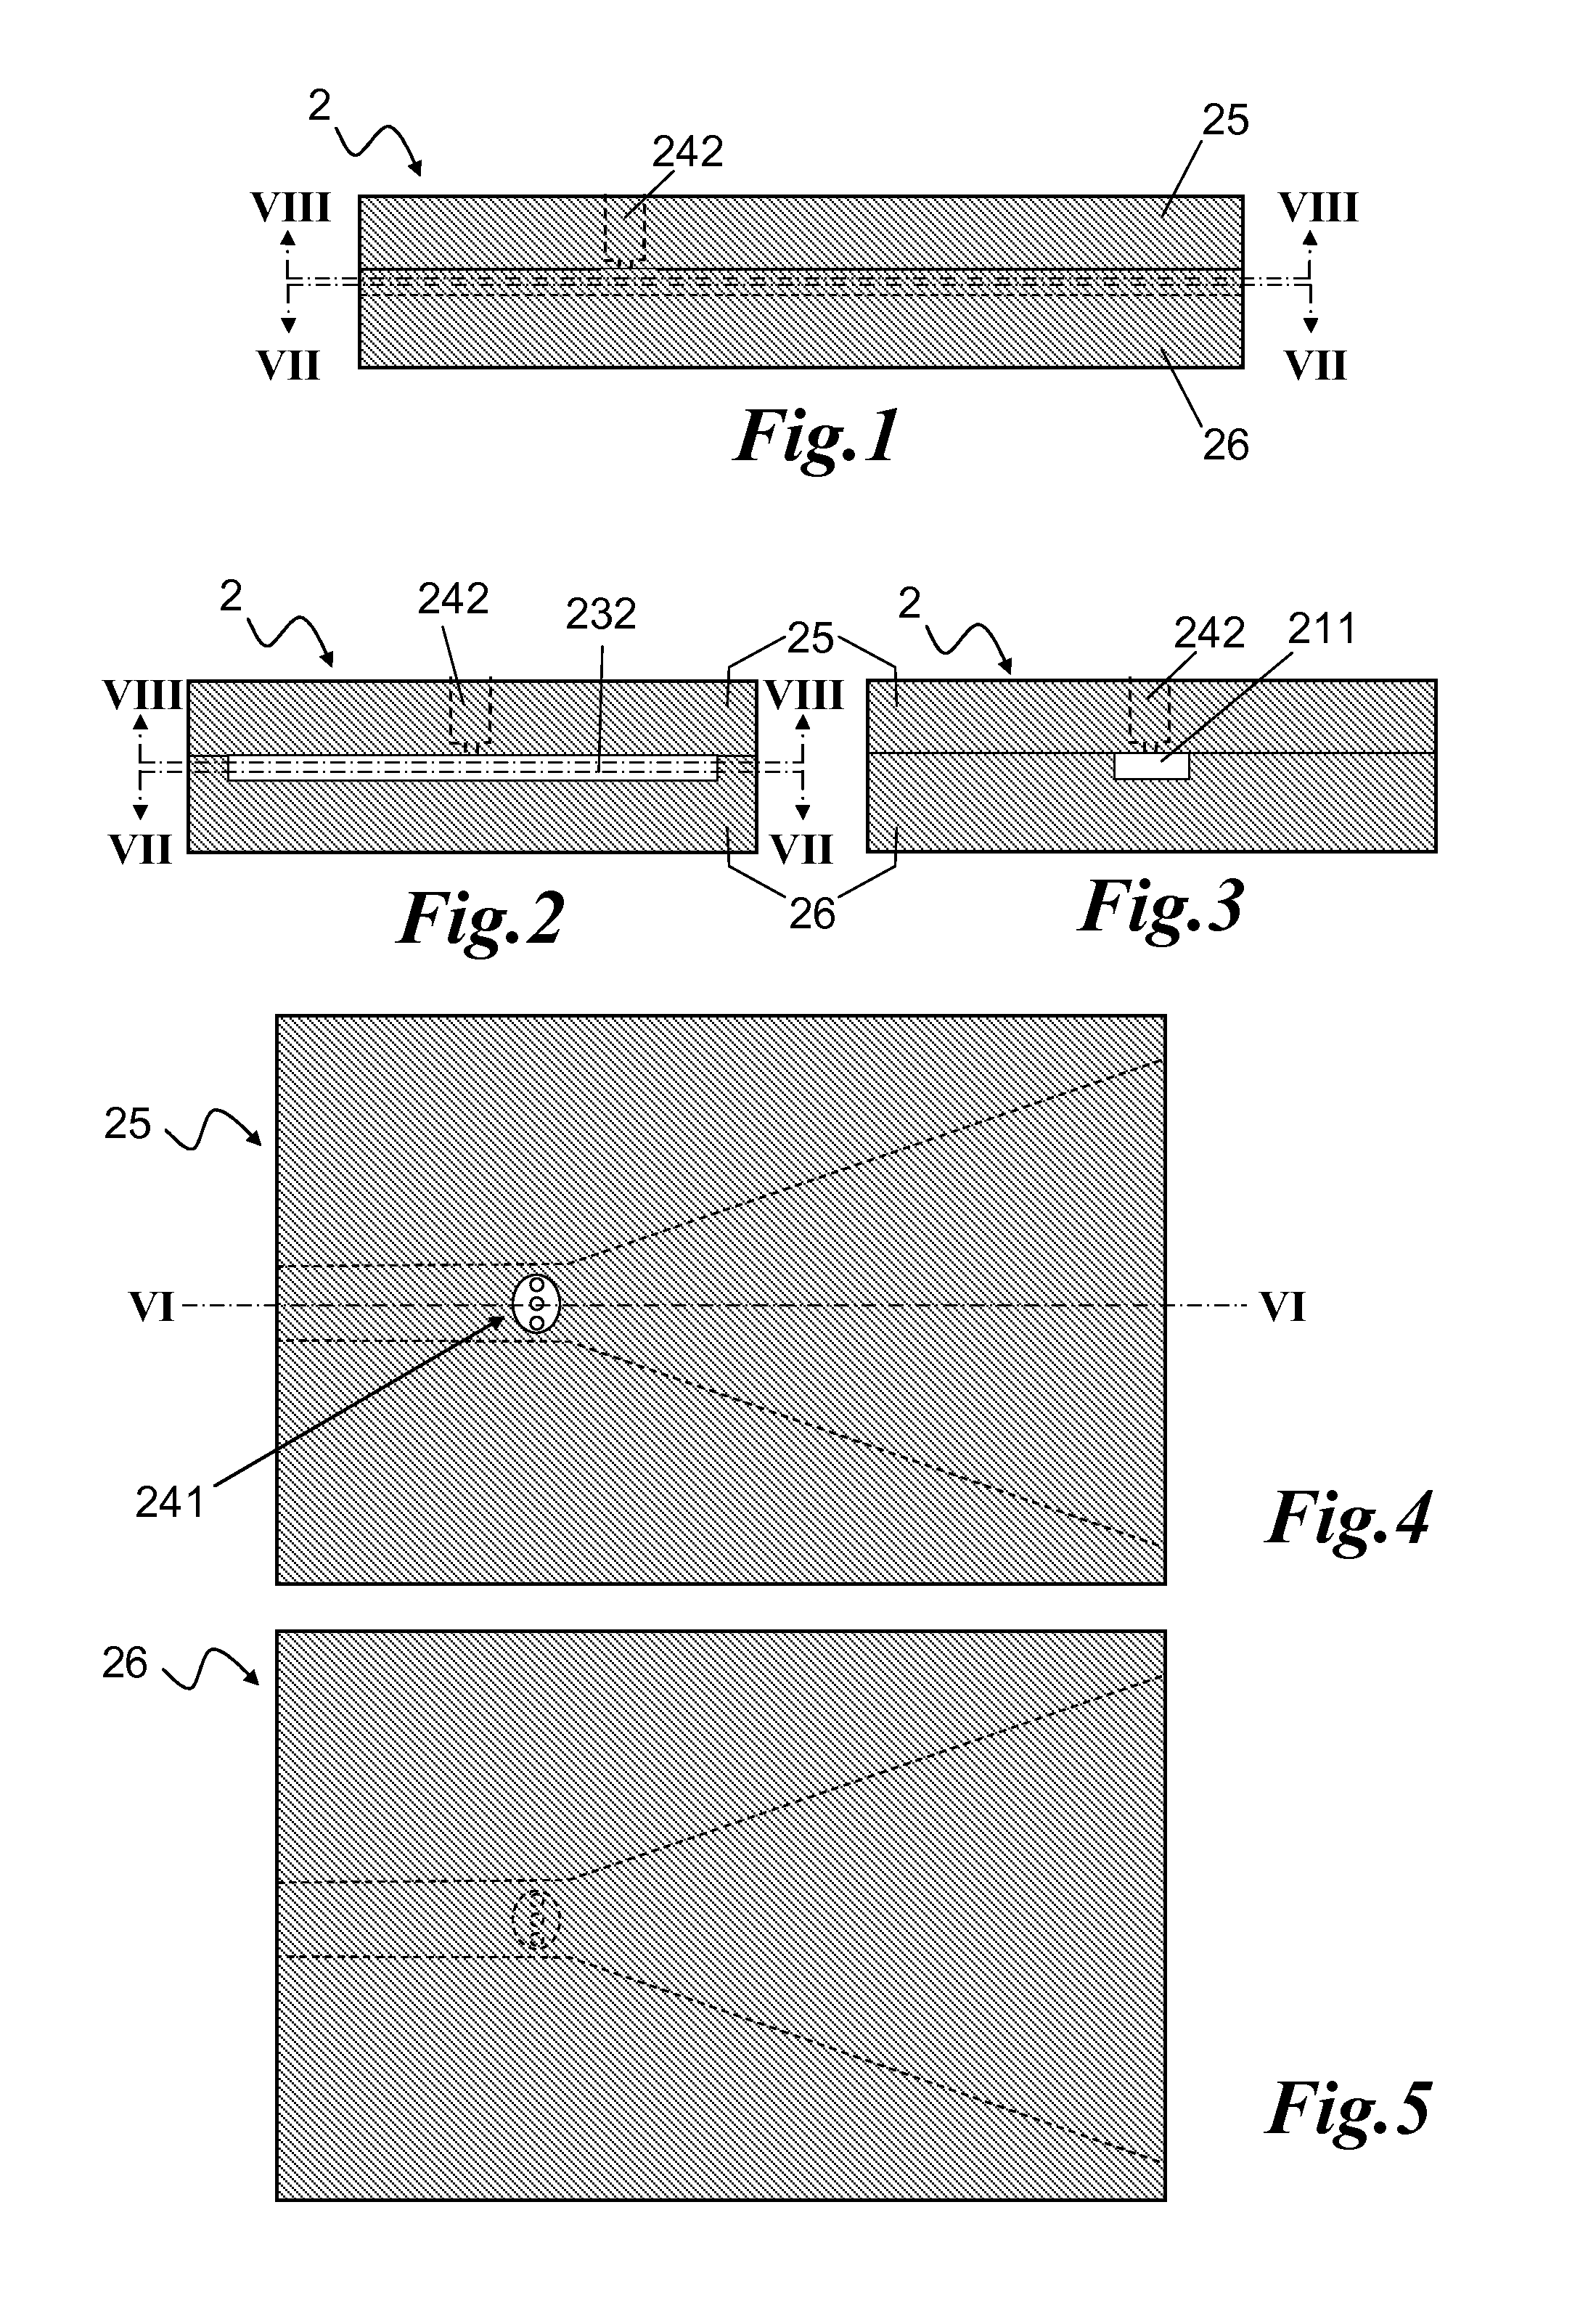 Method and Equipment for Reinforcing a Substance or an Object with Continuous Filaments